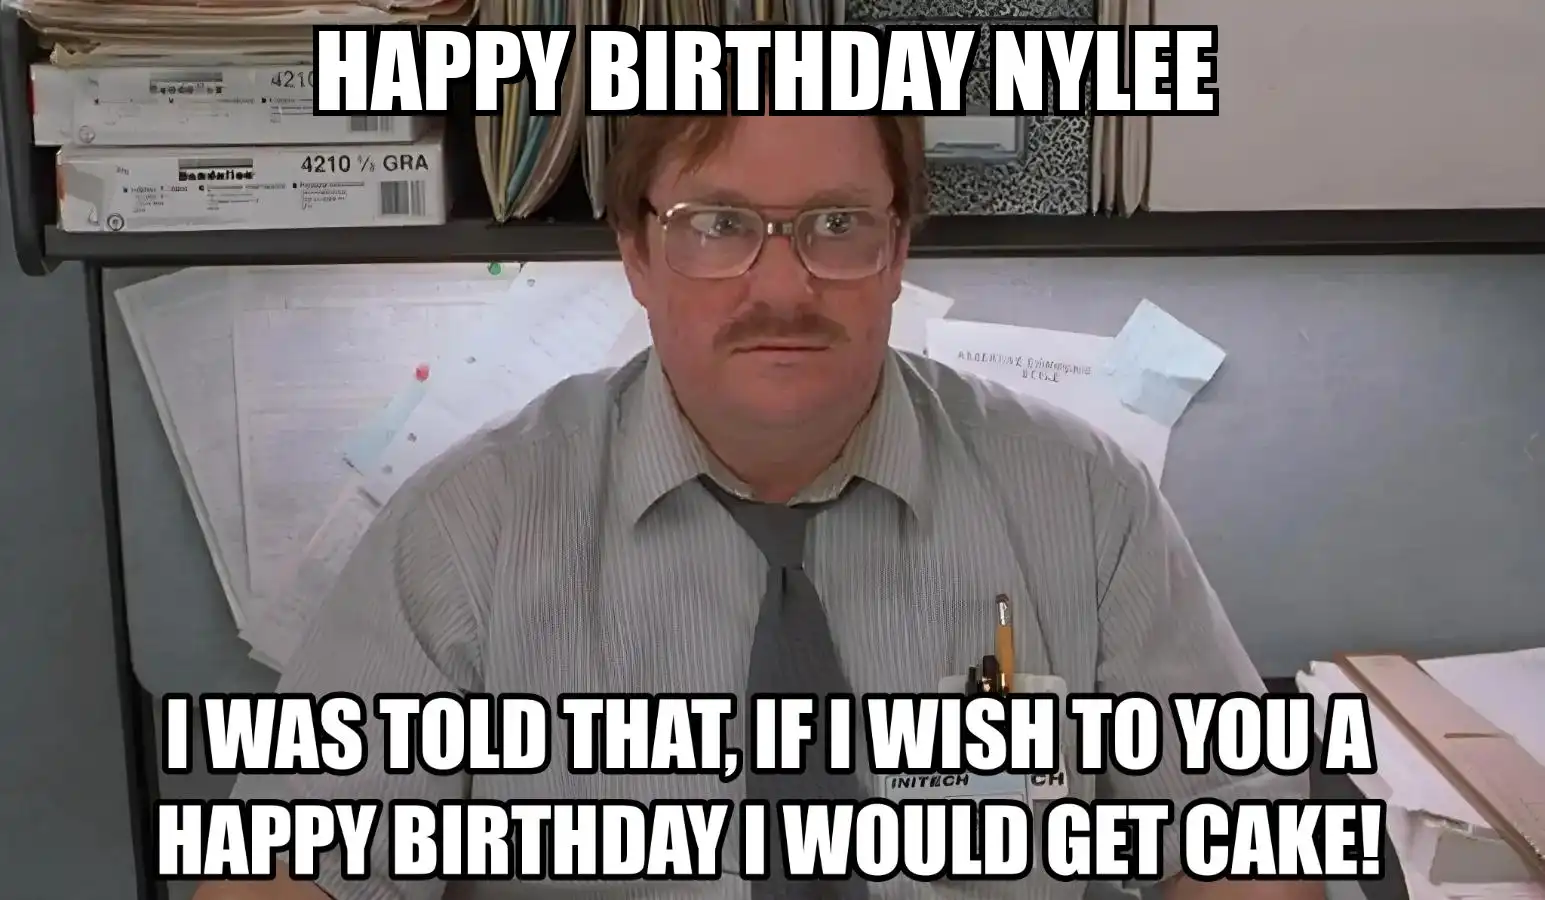 Happy Birthday Nylee I Would Get A Cake Meme